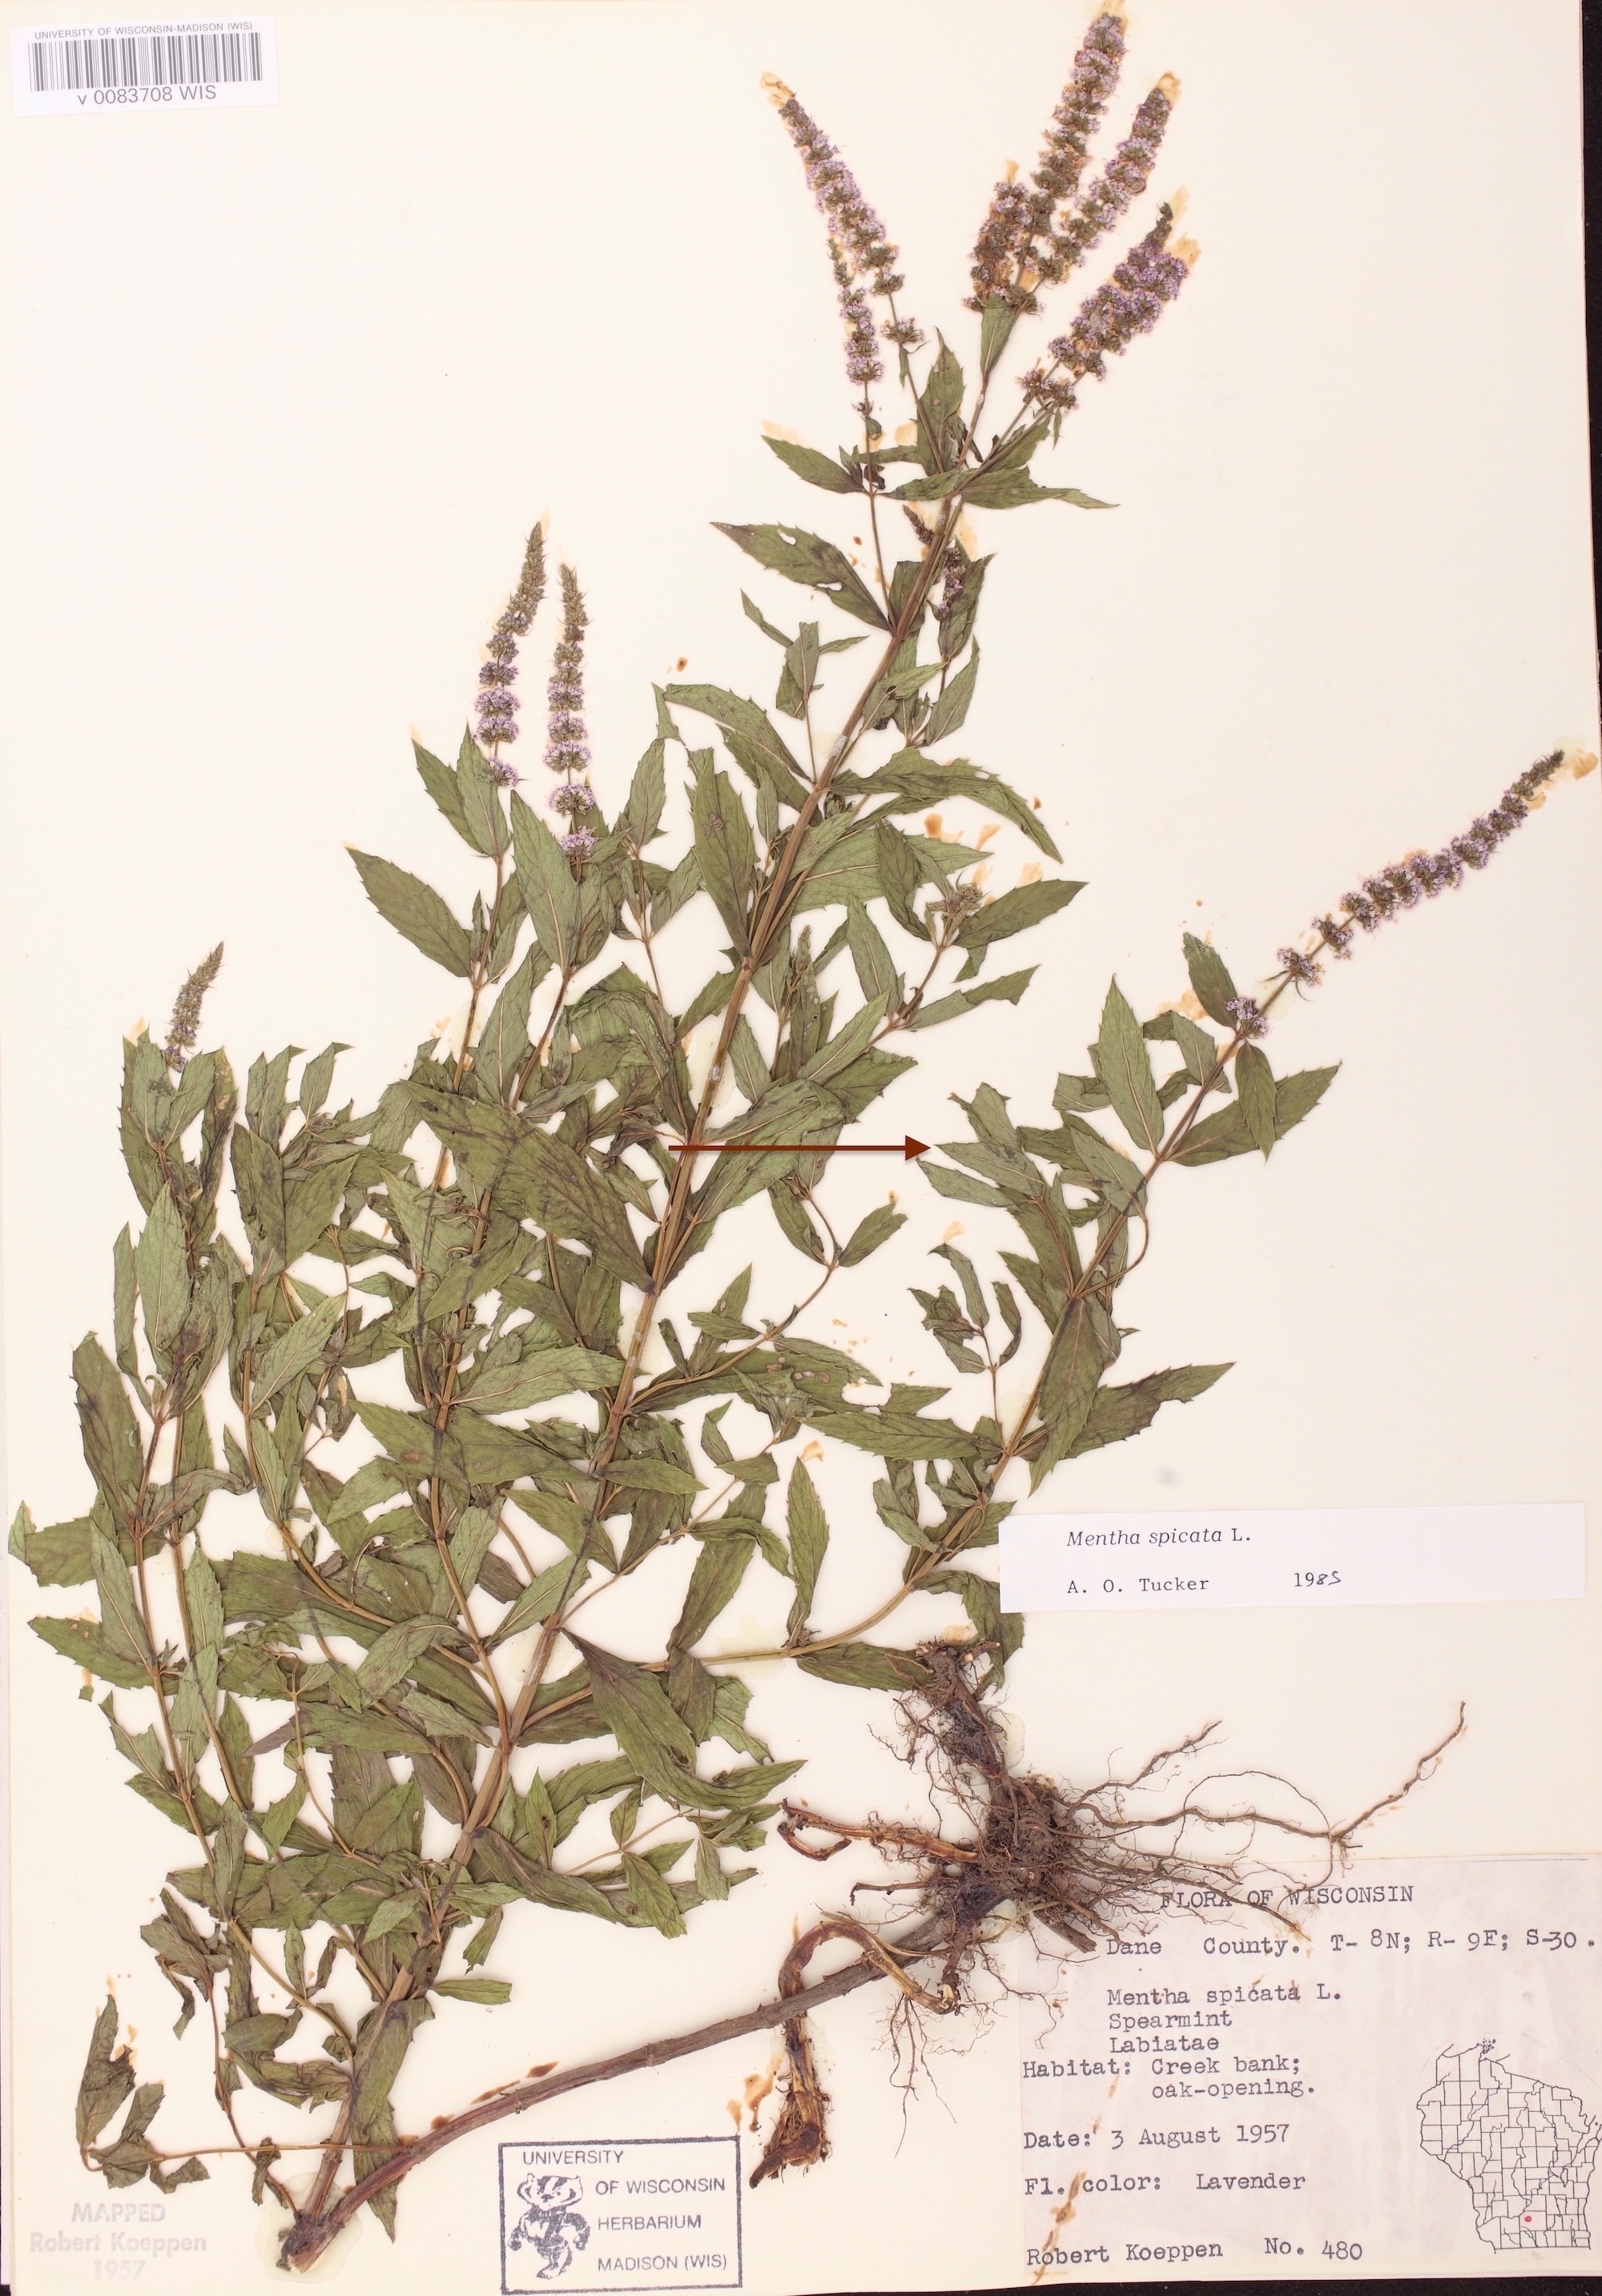 Hyssop specimen collected on a creek bank in Dane County, Wisconsin on August 3, 1957.